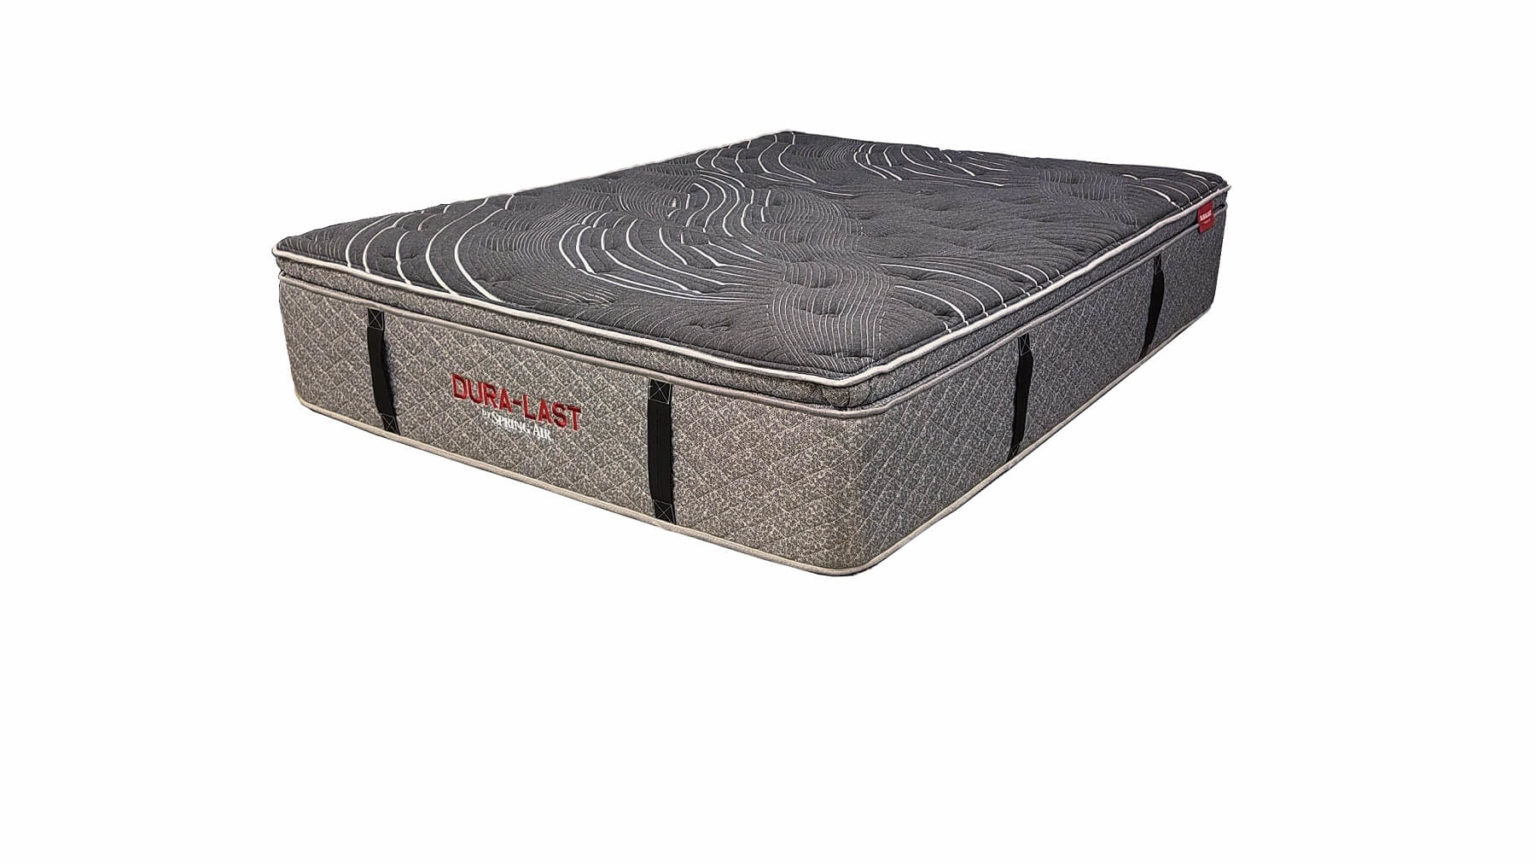 slely mattress spring air with a eaglecreek pillowtop